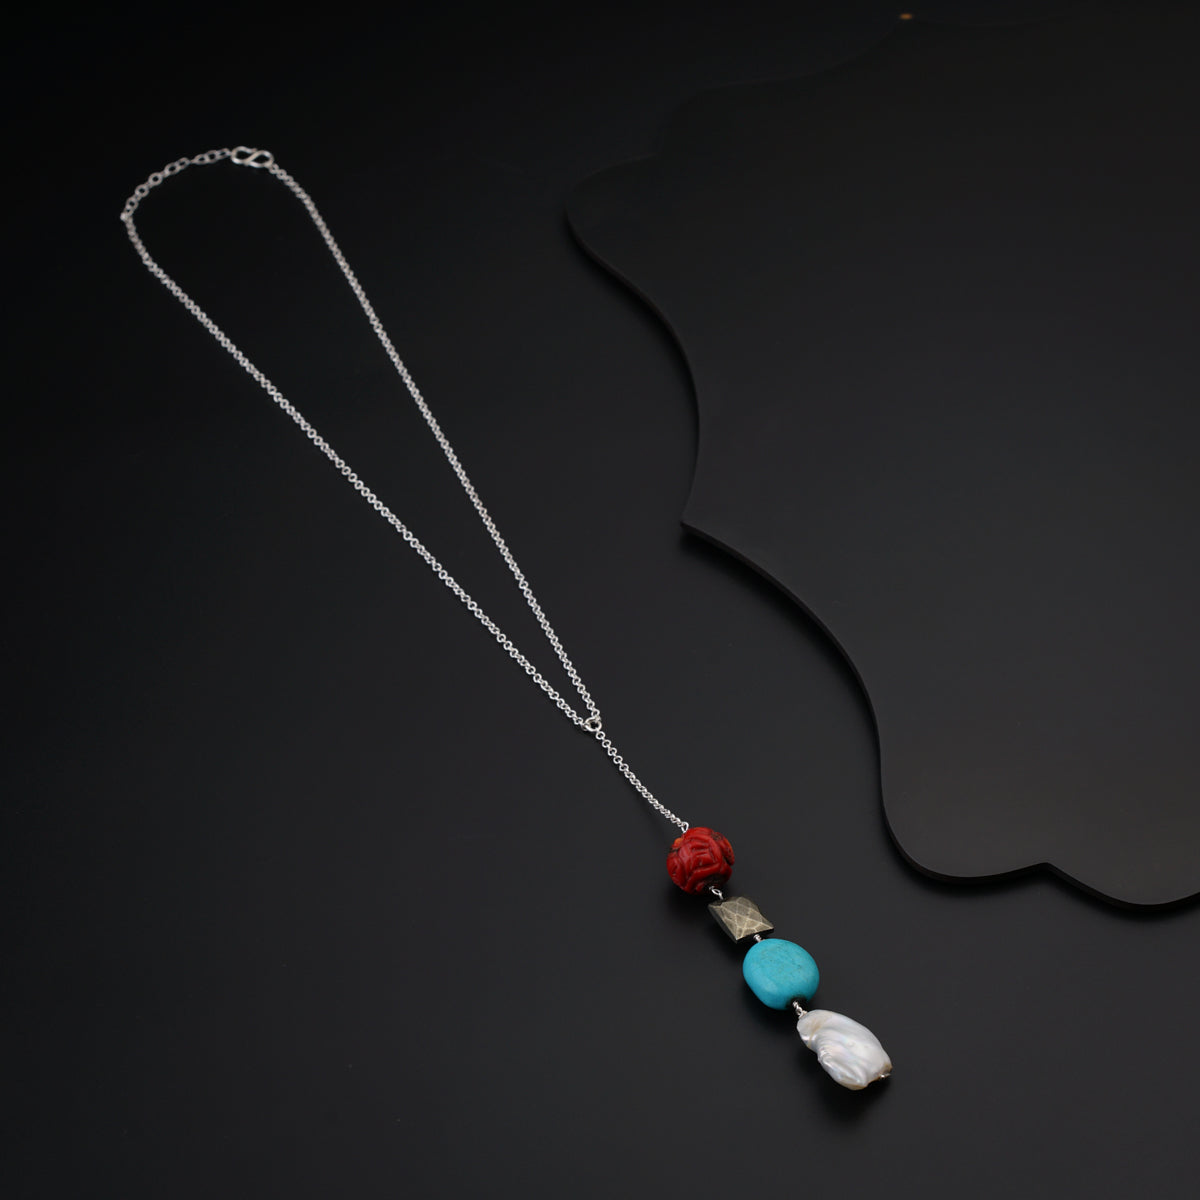 a necklace with a red, white and blue bead hanging from it